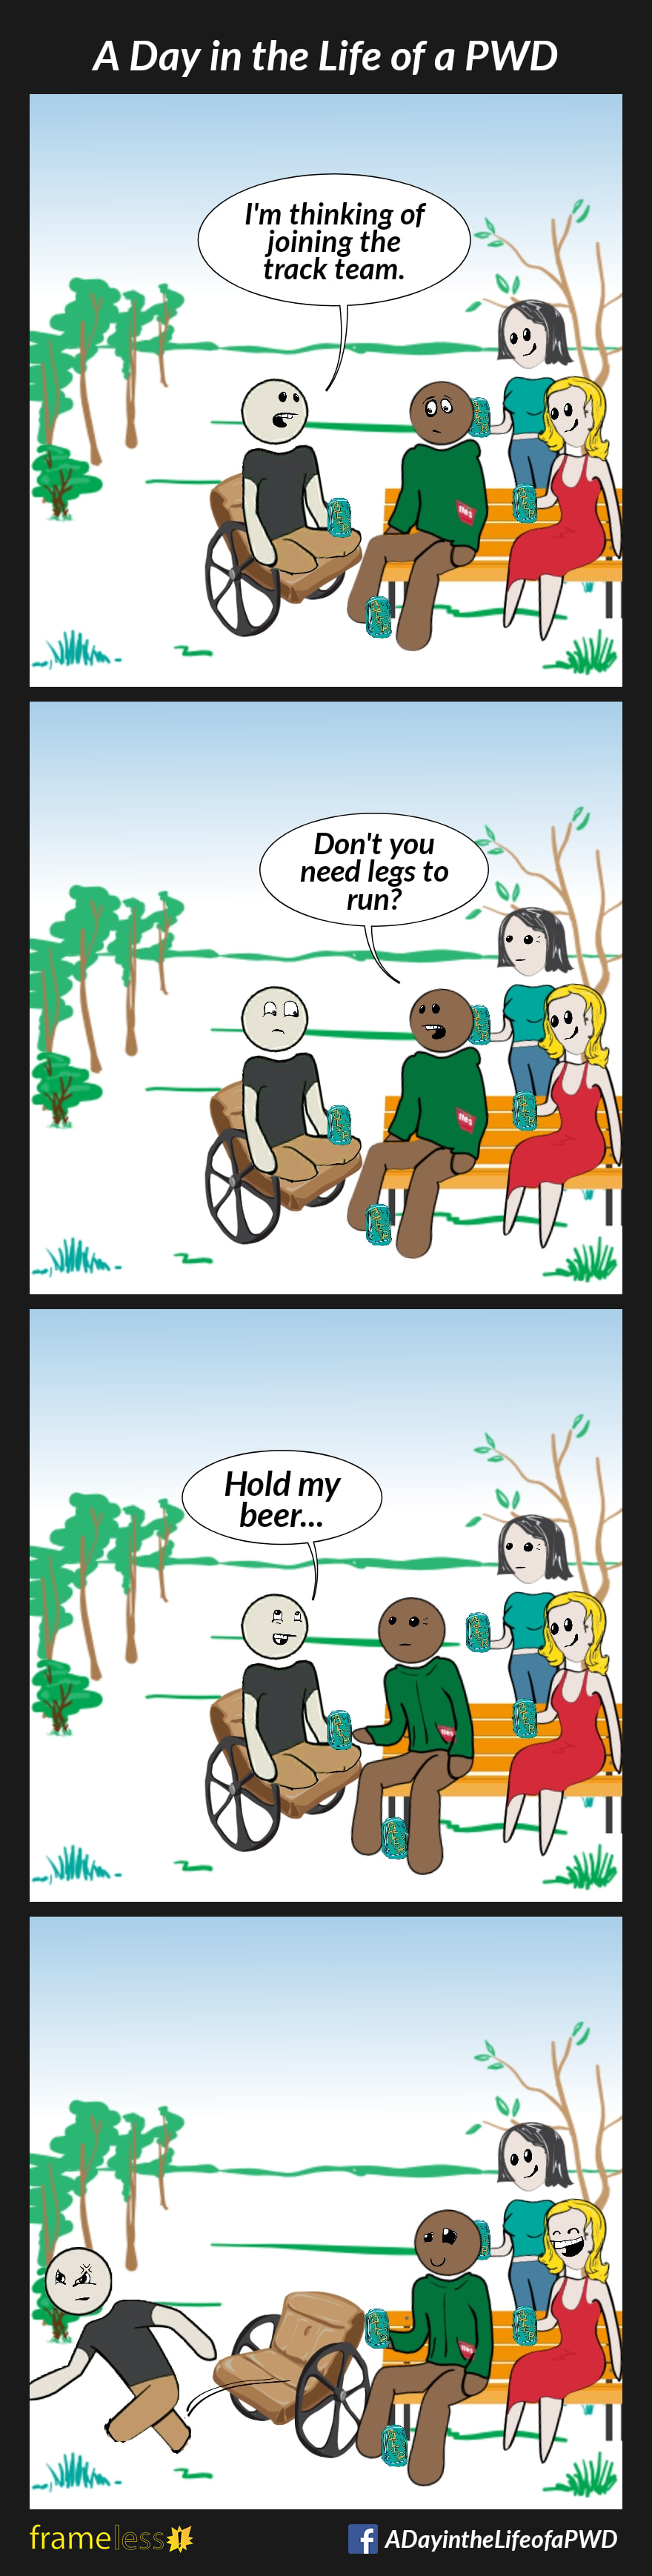 COMIC STRIP 
A Day in the Life of a PWD (Person With a Disability) 

Frame 1:
A man in a wheelchair who is missing his lower legs is sitting in the oark with friends, drinking beer.
MAN: I'm thinking of joining the track team

Frame 2:
FRIEND: Don't you need legs to run?

Frame 3:
MAN: Hold my beer...

Frame 4:
The man jumps from his chair and begins to run.